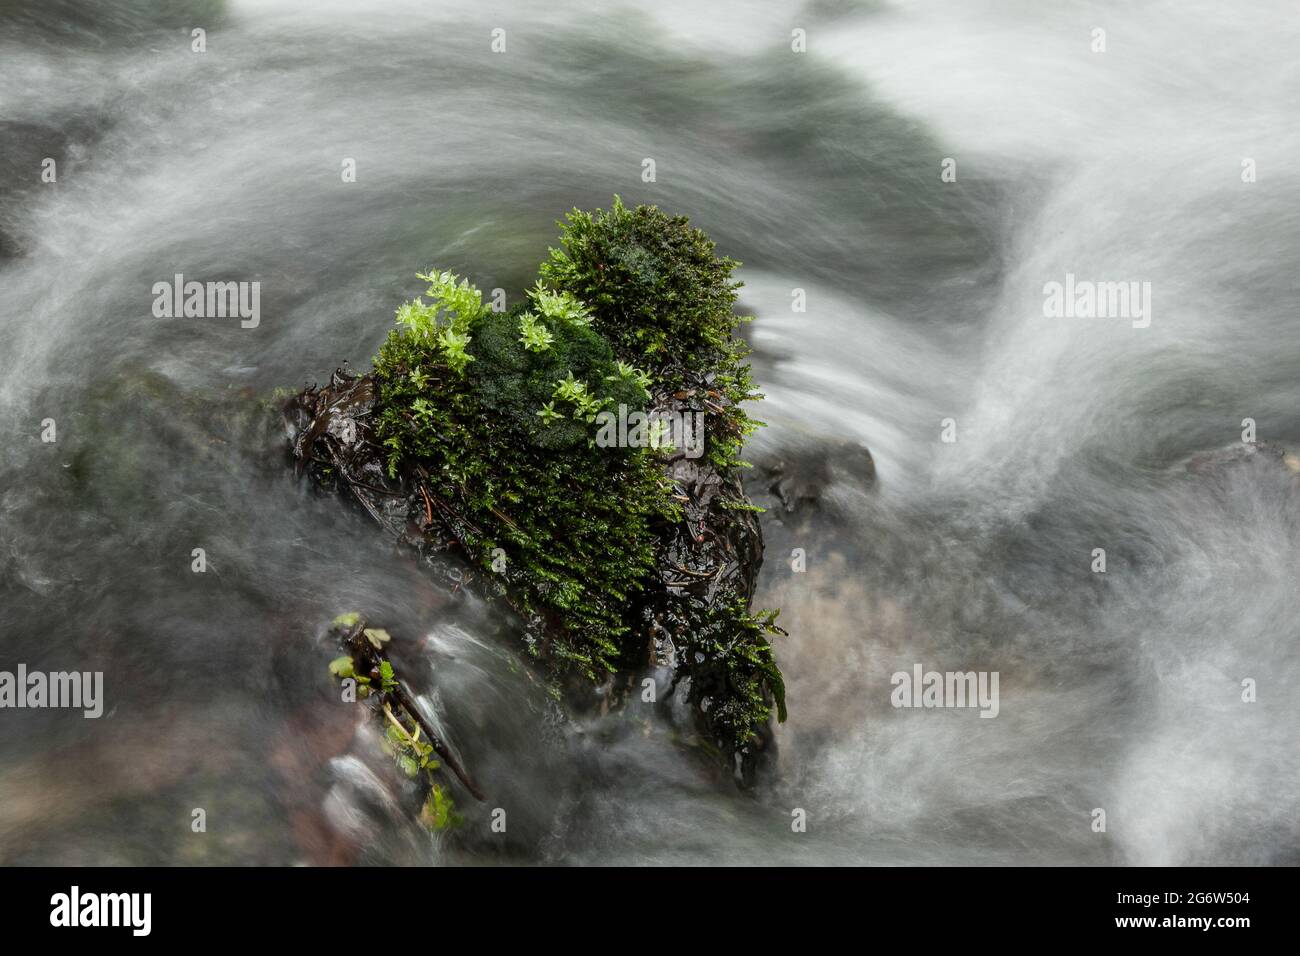 Moss, stones and plants are washed around by the water of a stream. Stock Photo